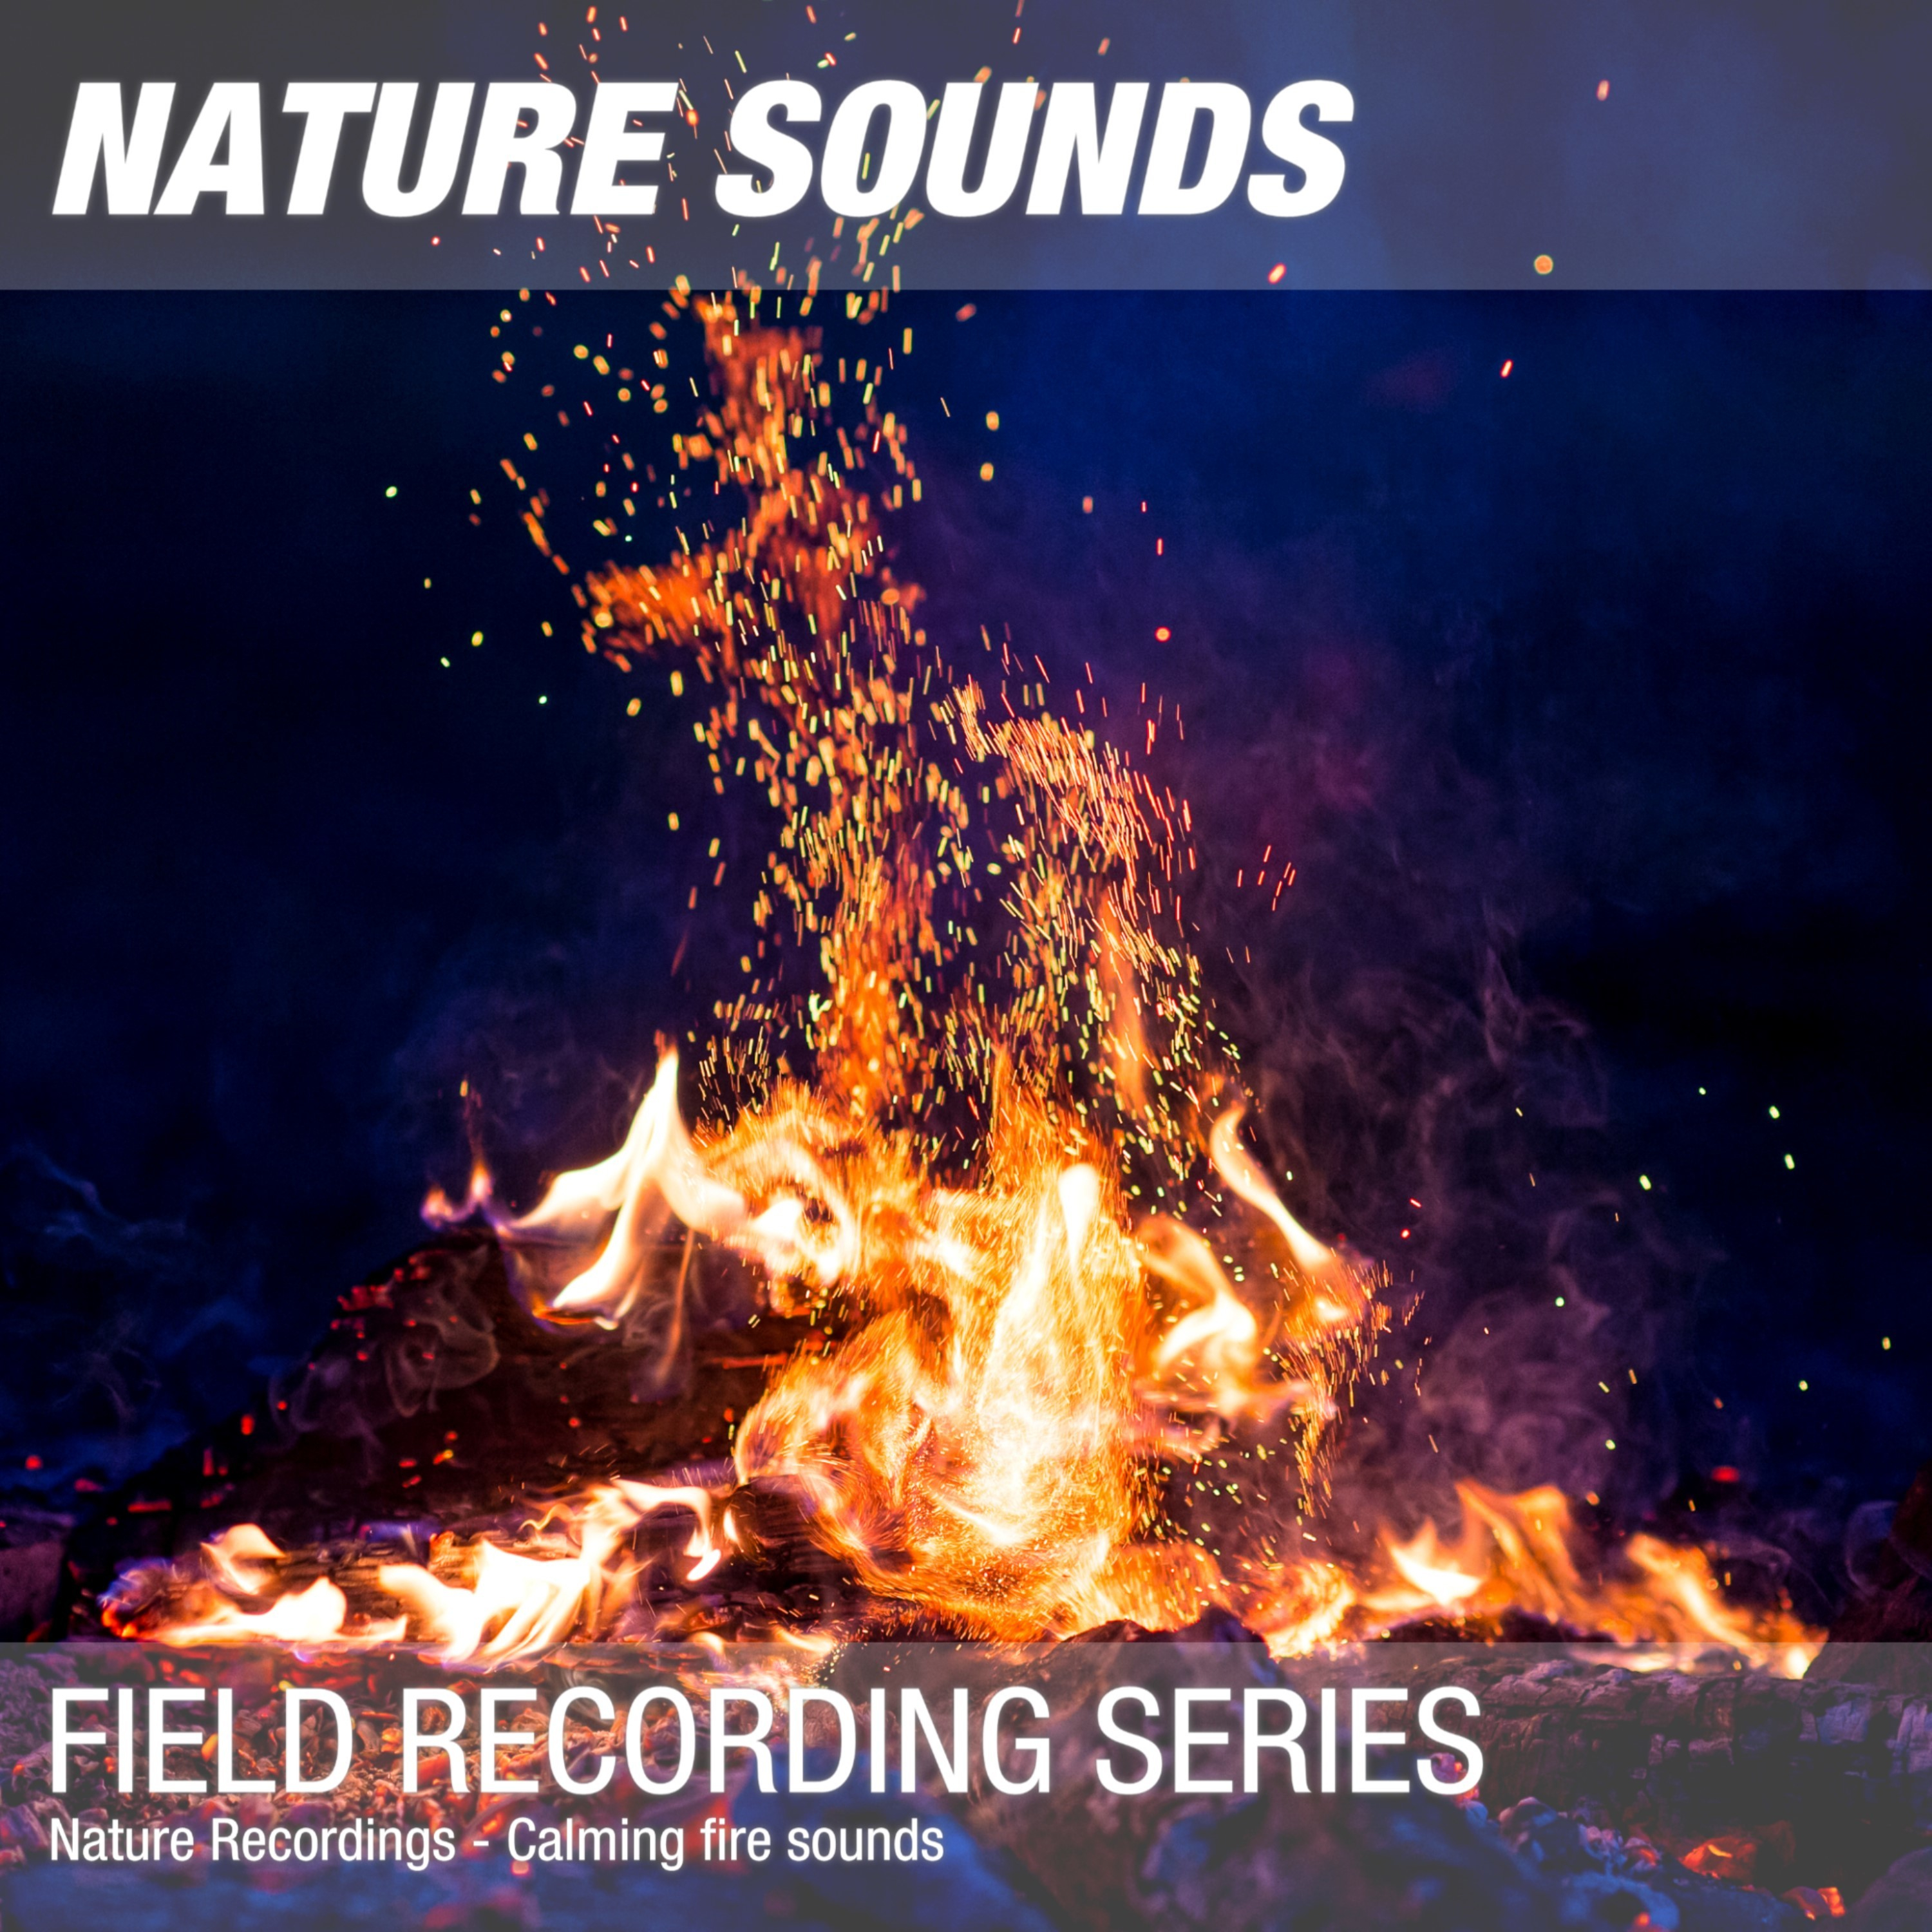 Nature Sounds for Sleep & Relaxation (Soothing campfire at night) 09